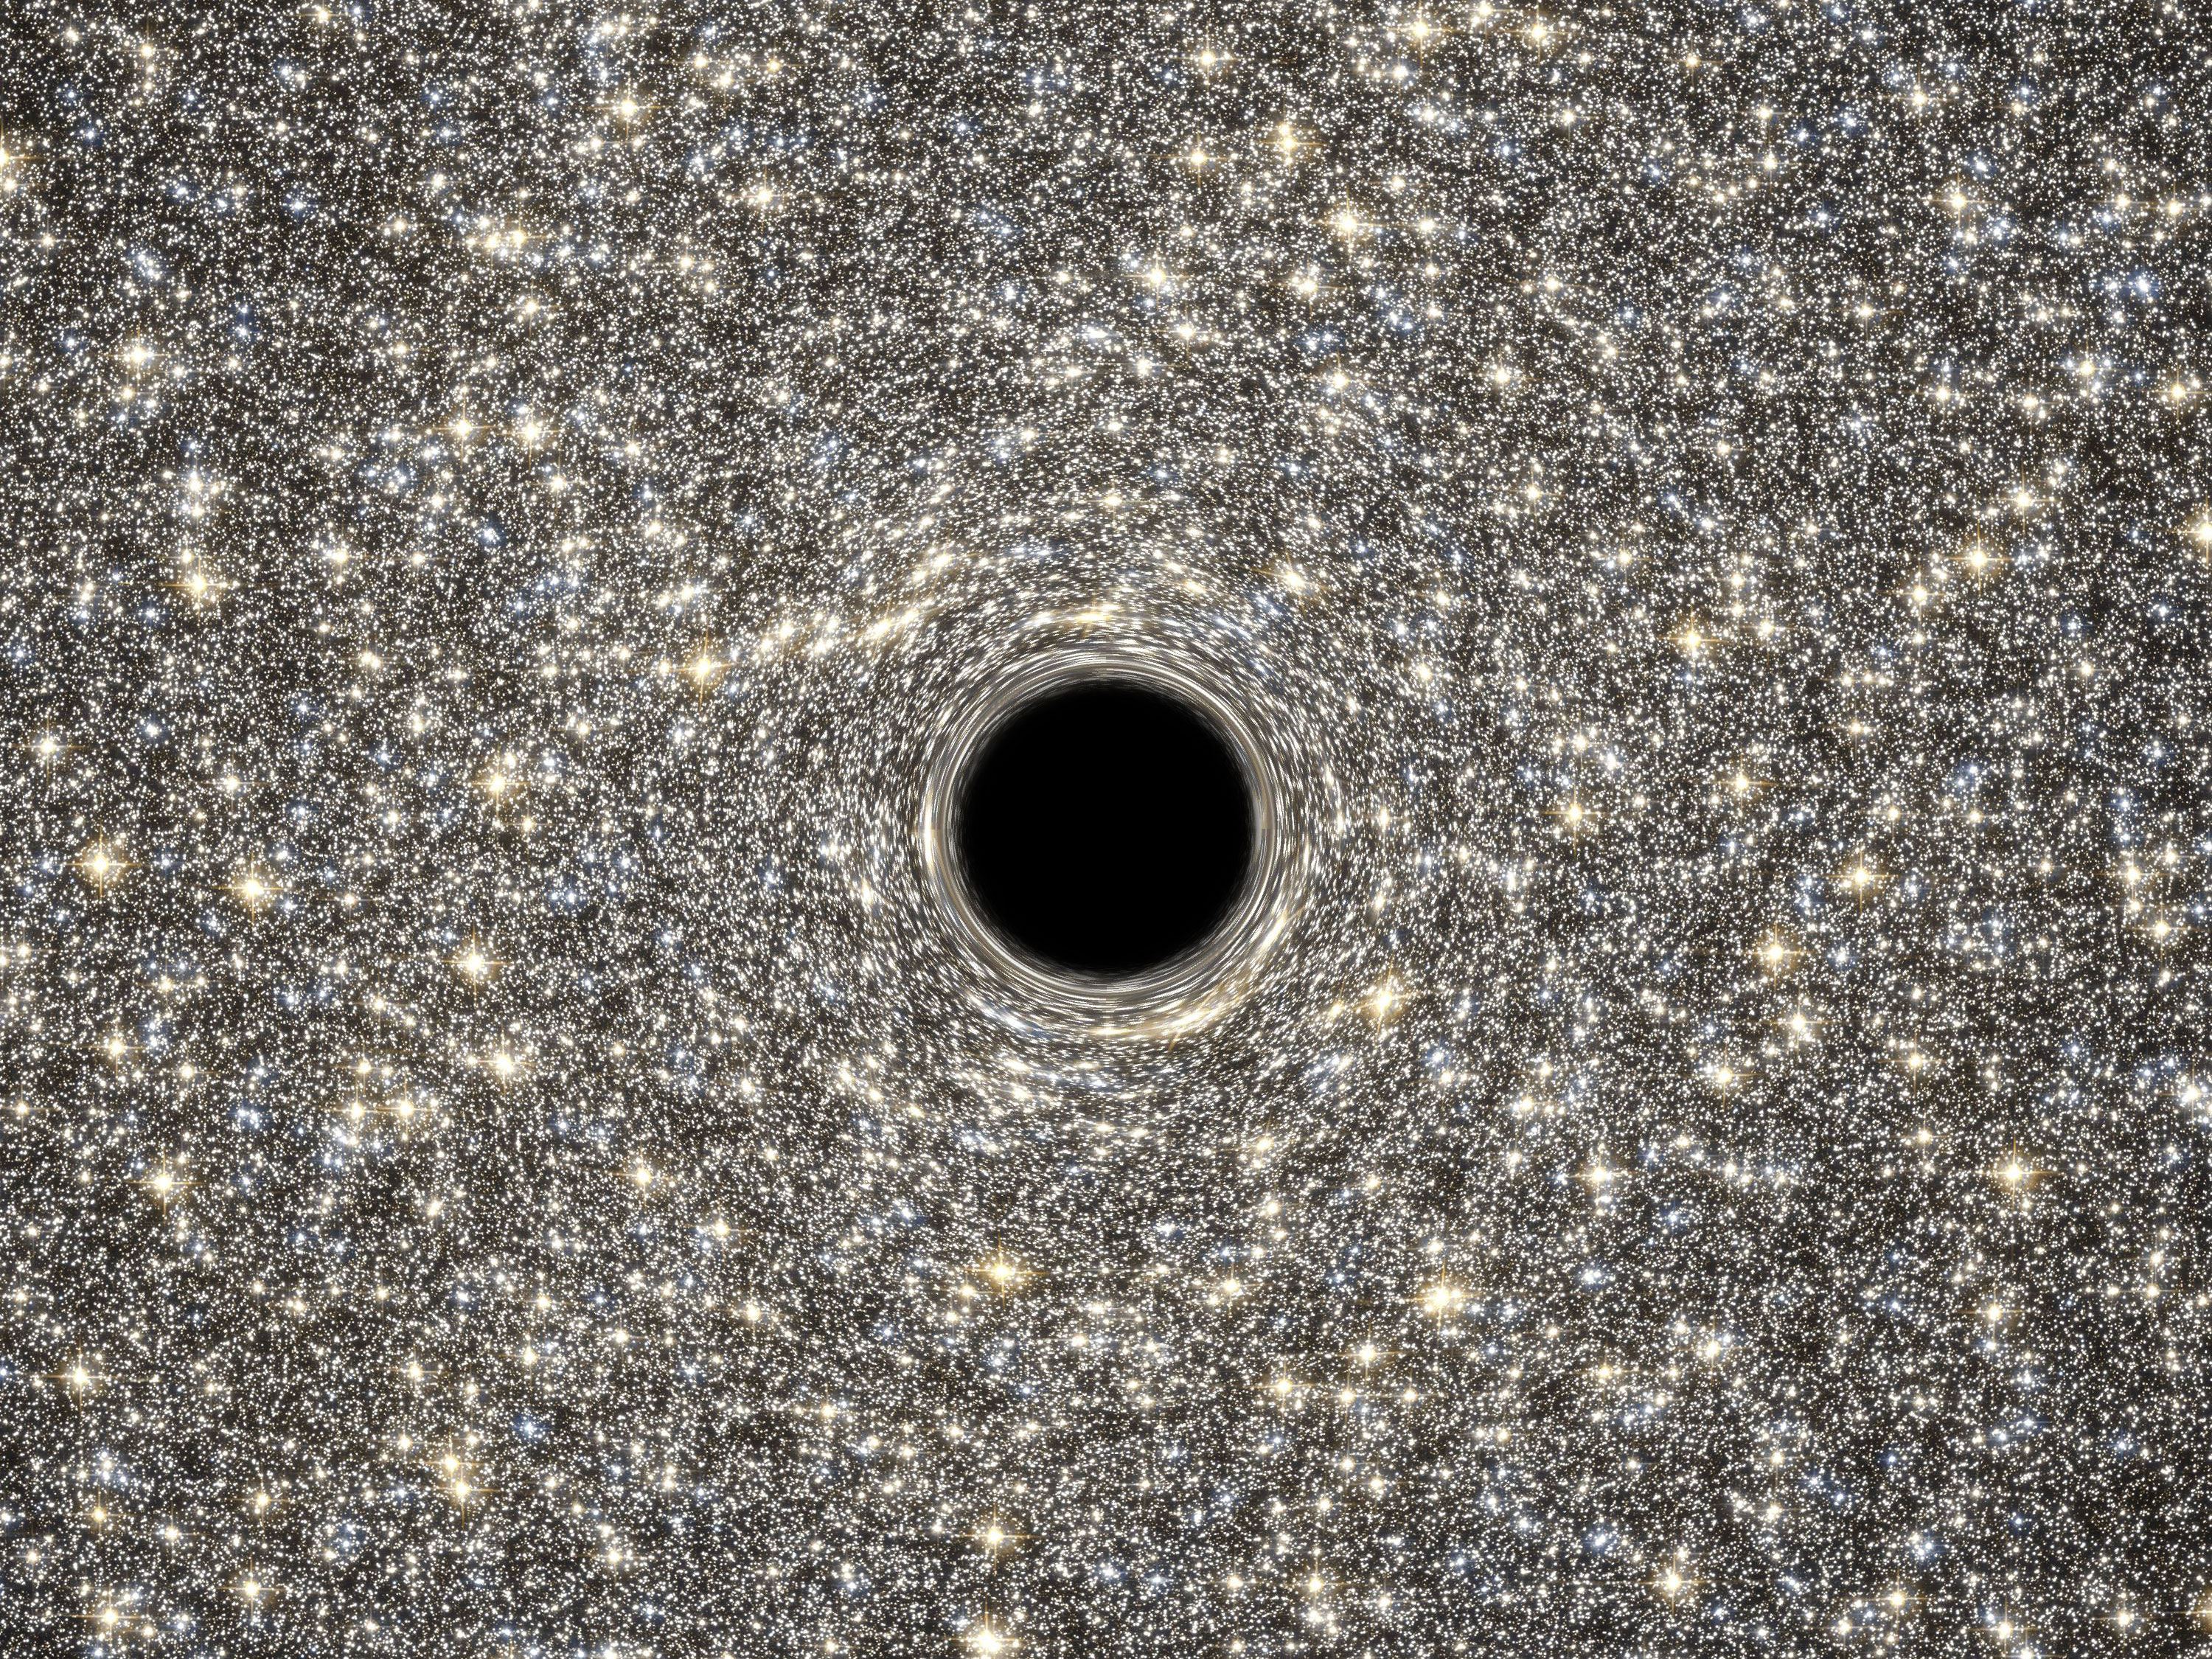 This is an illustration of the supermassive black hole located in the middle of the very dense galaxy M60-UCD1. Because no light can escape from the black hole, it appears simply in silhouette against the starry background. The black hole’s intense gravitational field warps the light of the background stars to form ring-like images just outside the dark edges of the black hole’s event horizon. Credit: NASA, ESA, D. Coe, G. Bacon (STScI)